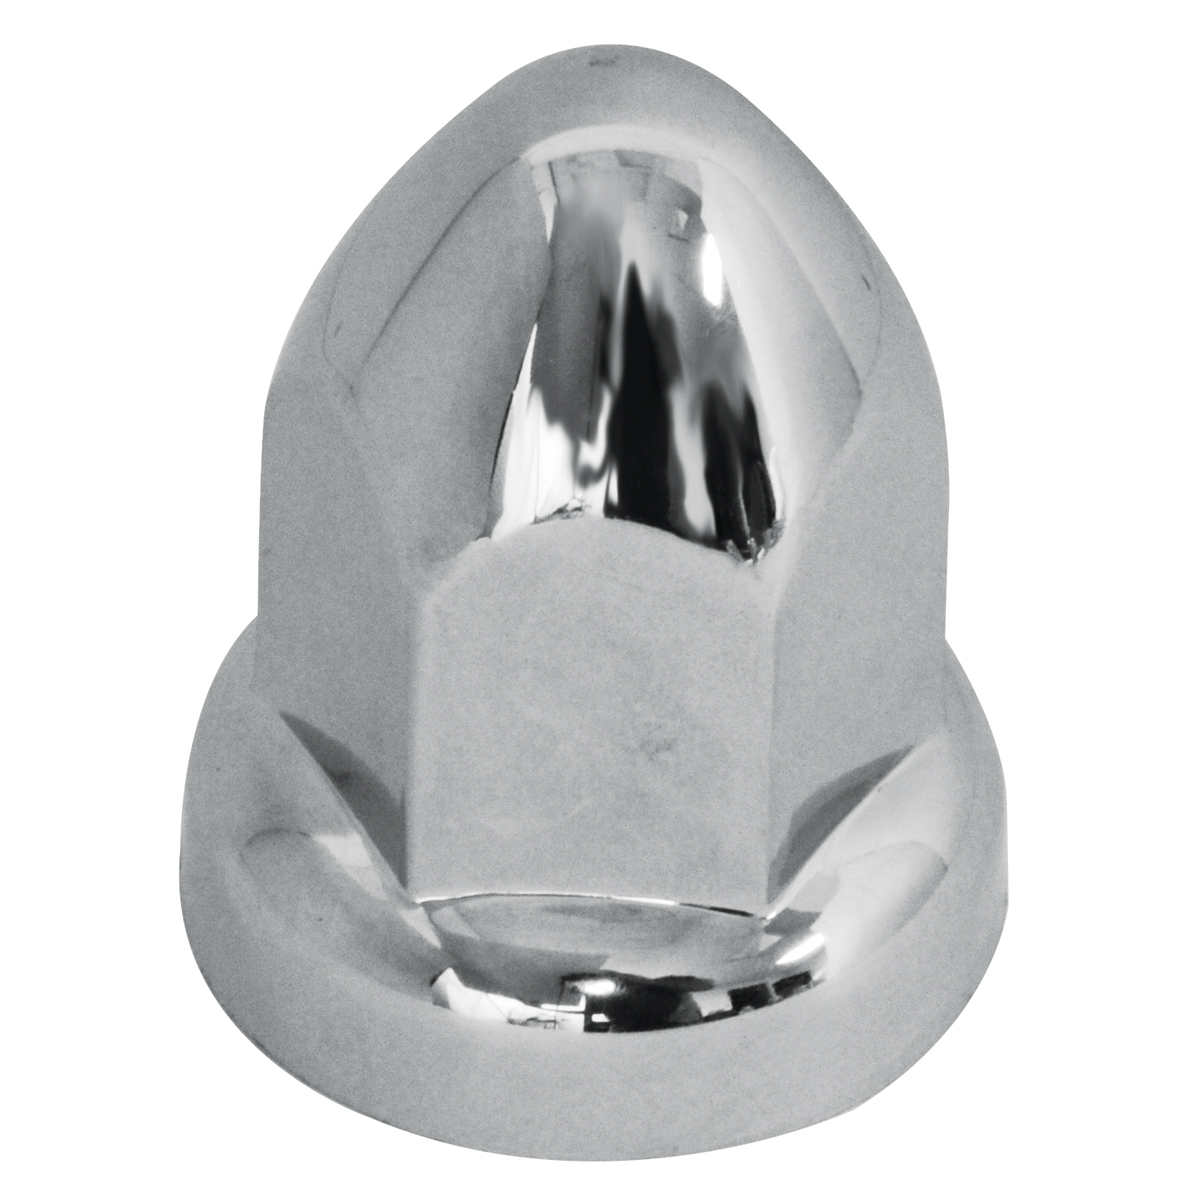 RoadPro 33mm Flanged Chrome-Plated Plastic Lugnut Cover Silver Lug Nut Cap with Flange Semi Truck Lug Nut Cover